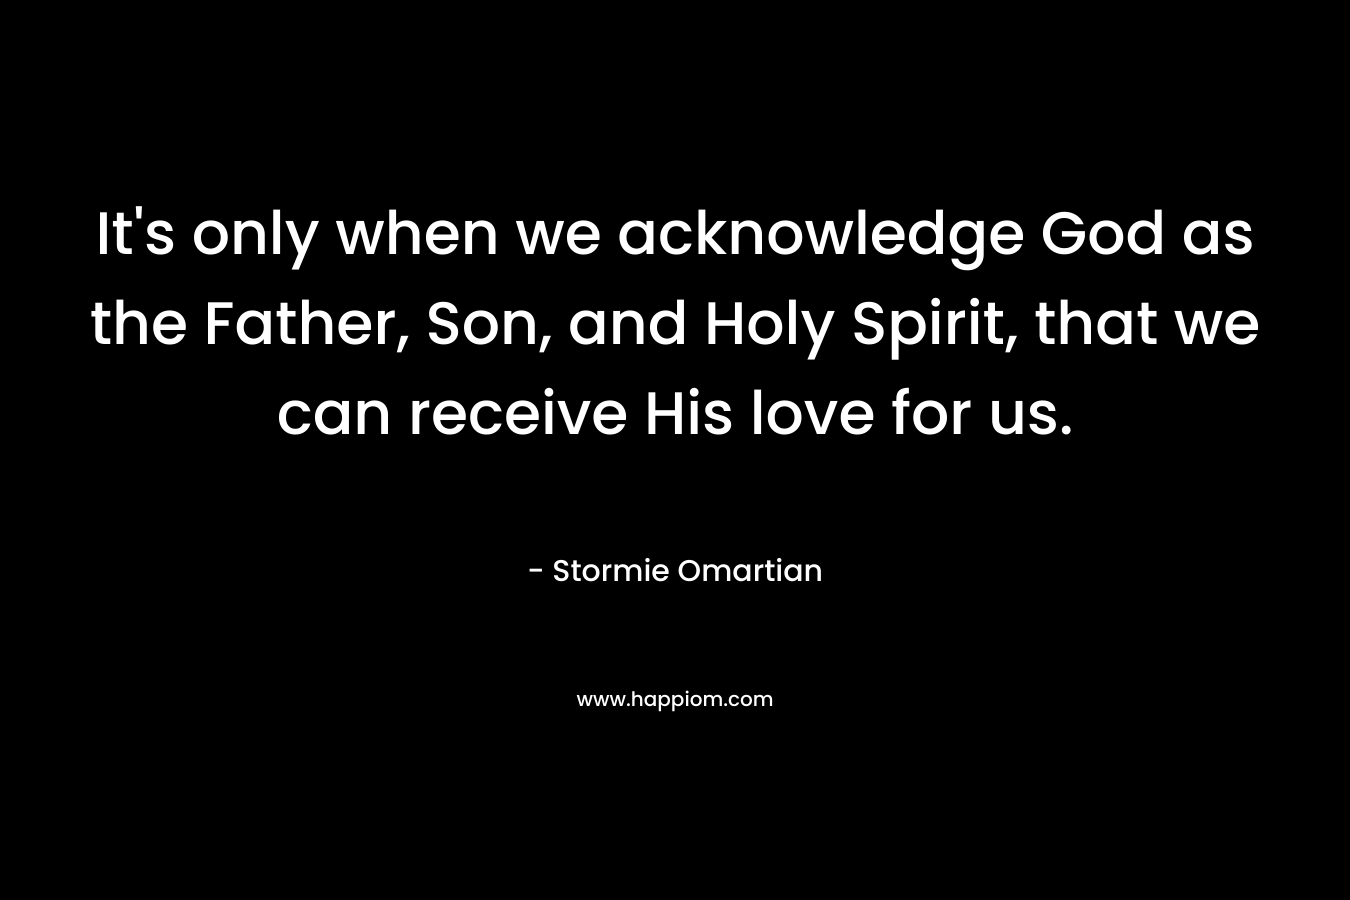 It's only when we acknowledge God as the Father, Son, and Holy Spirit, that we can receive His love for us.